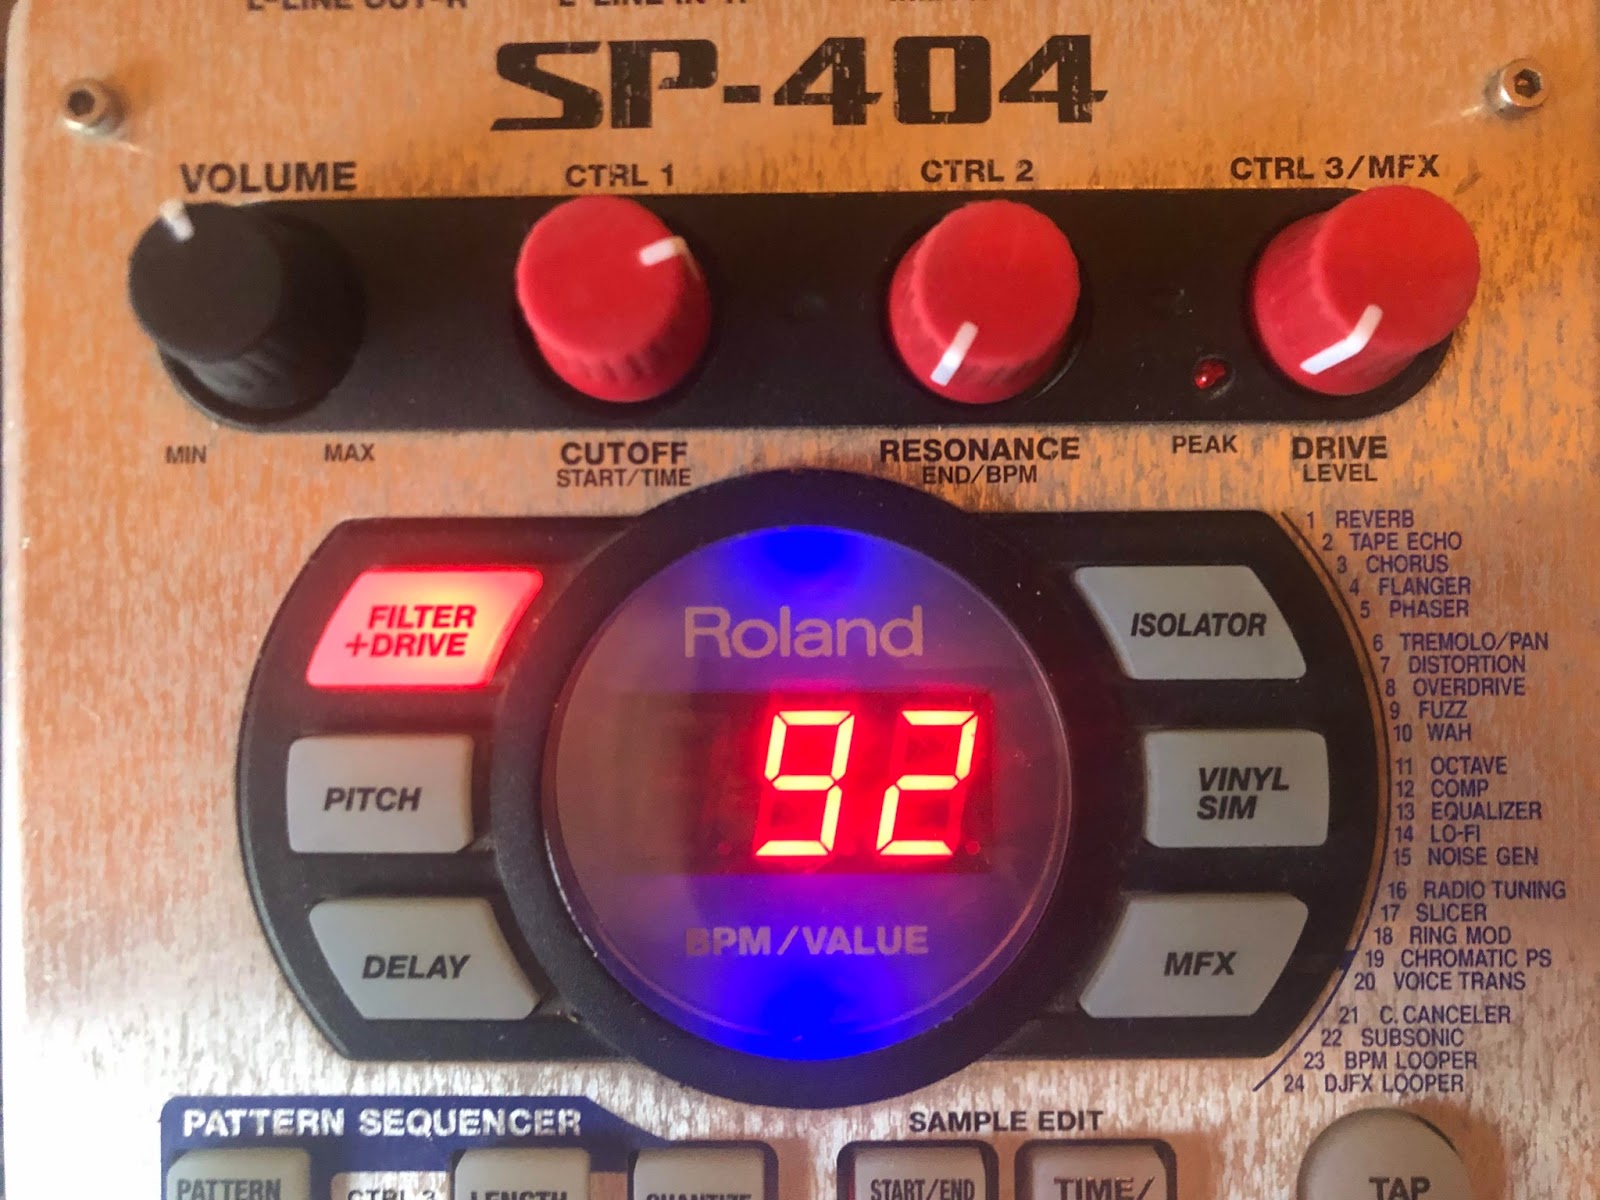 Is the sp404 a groovebox?